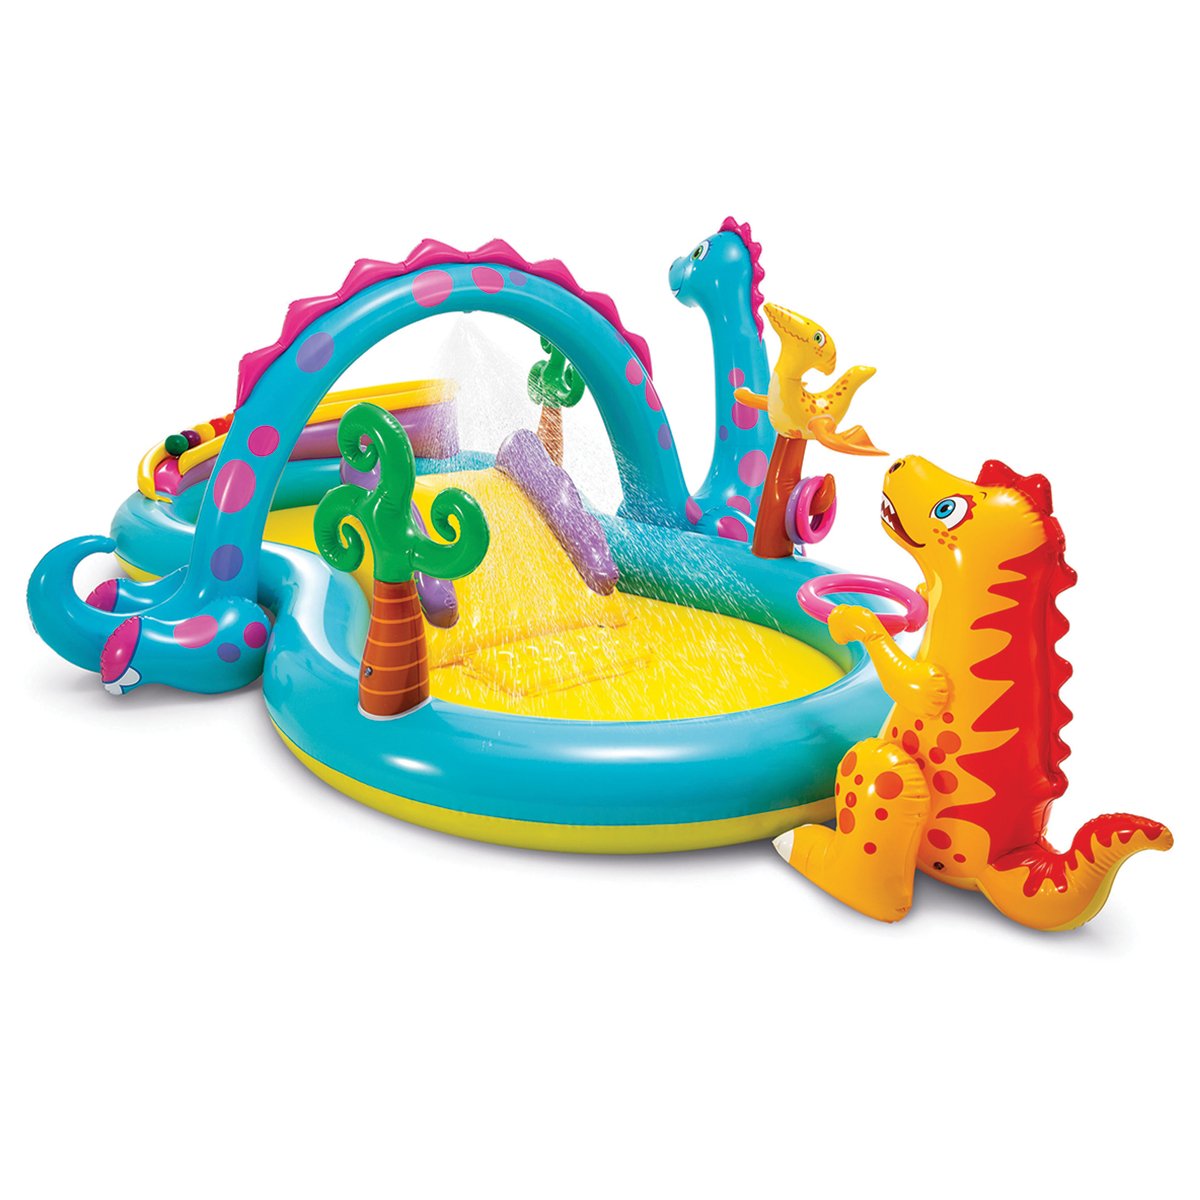 Intex 57135NP Dinoland Play Centre Inflatable Kids Pool with Slide 1